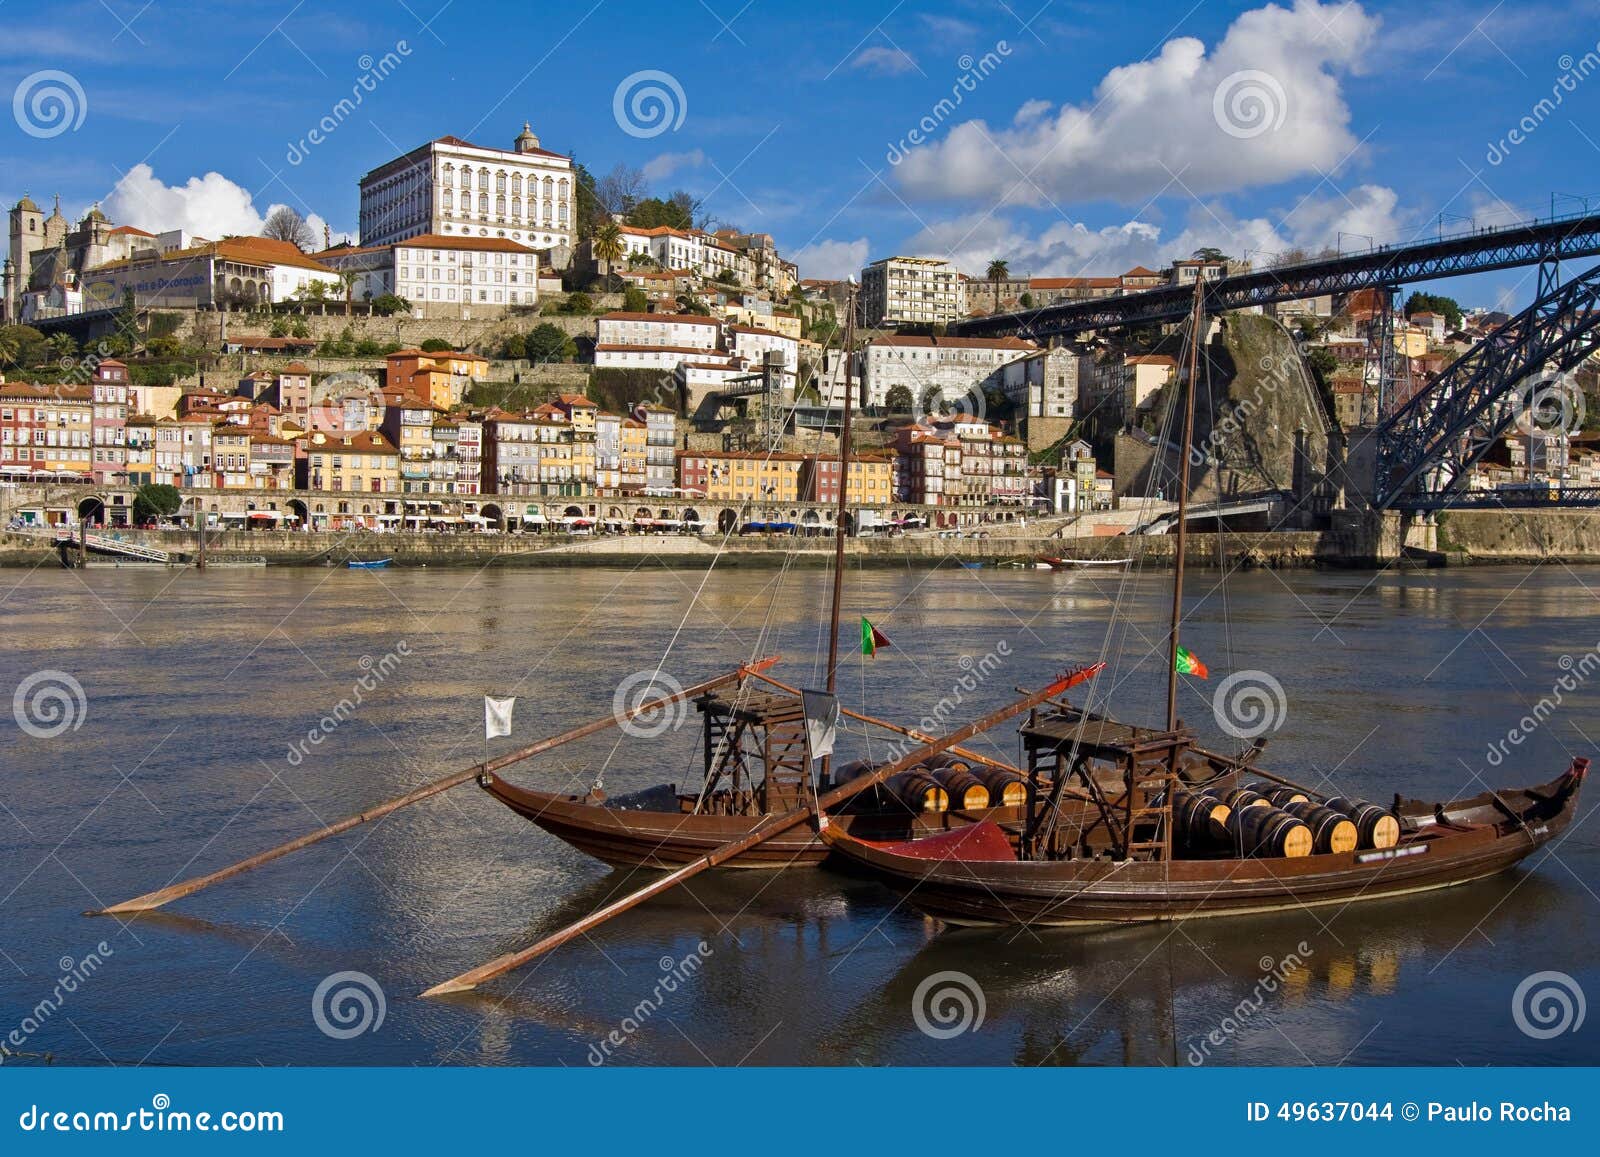 boats in douro river